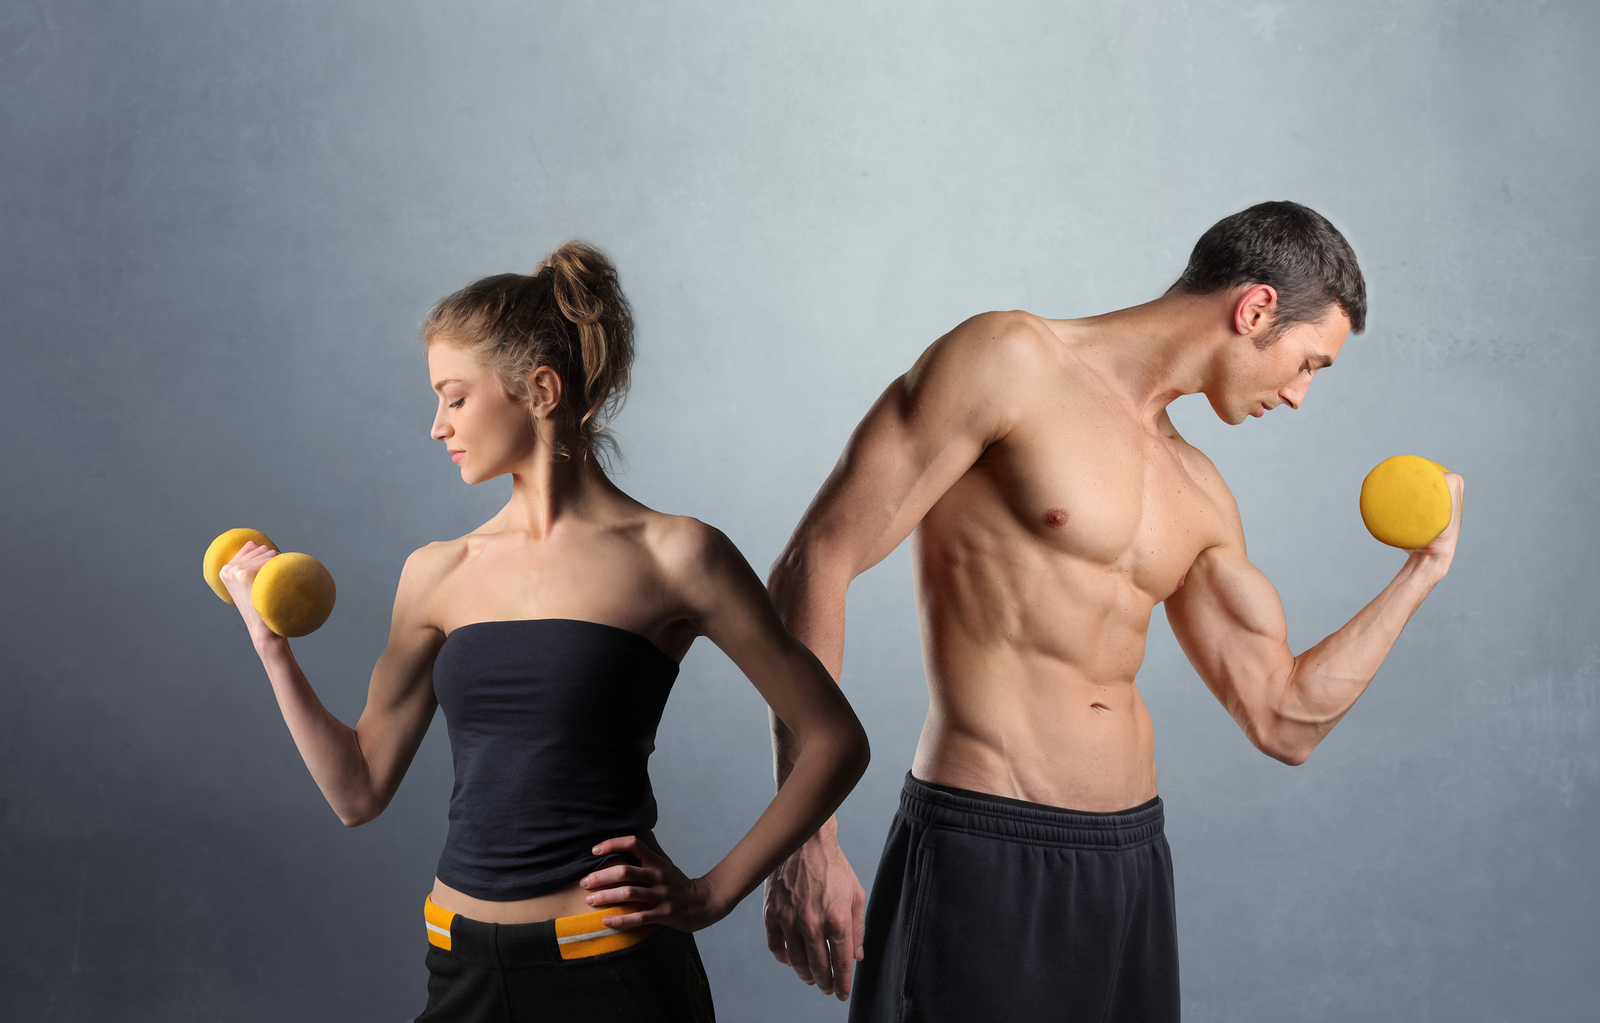 Male and Female Strength and Muscle Growth: Do Men and Women Gain the Same? – StrengthLog